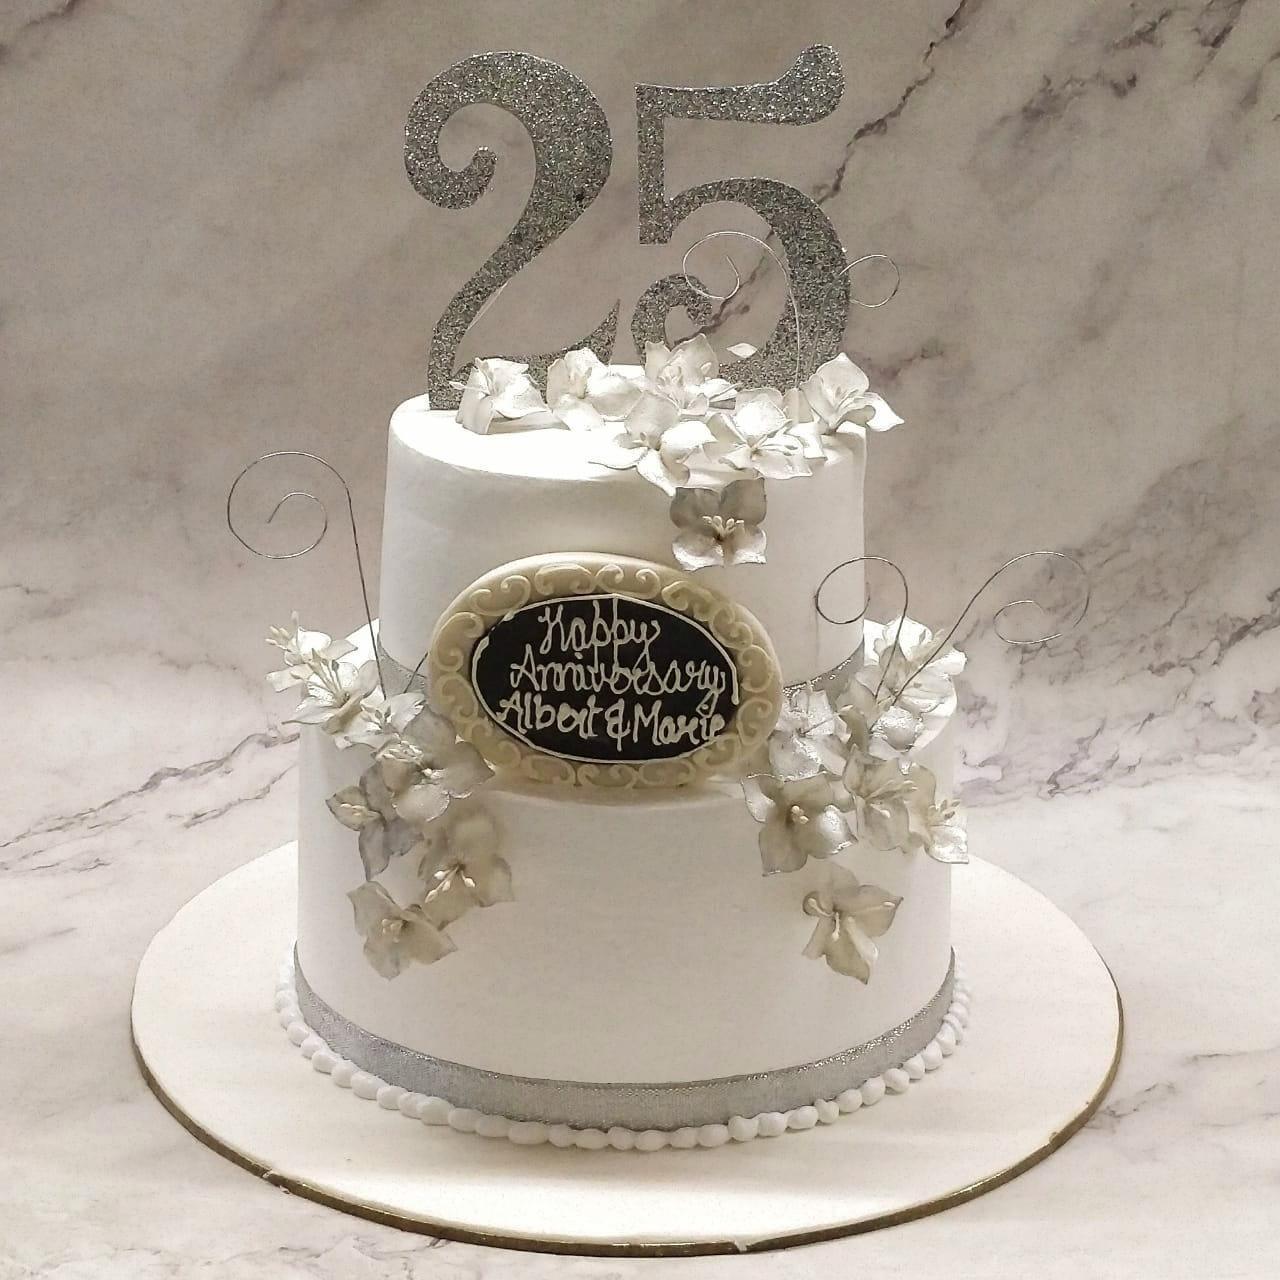 Top 999+ 25th anniversary cake images – Amazing Collection 25th anniversary cake images Full 4K